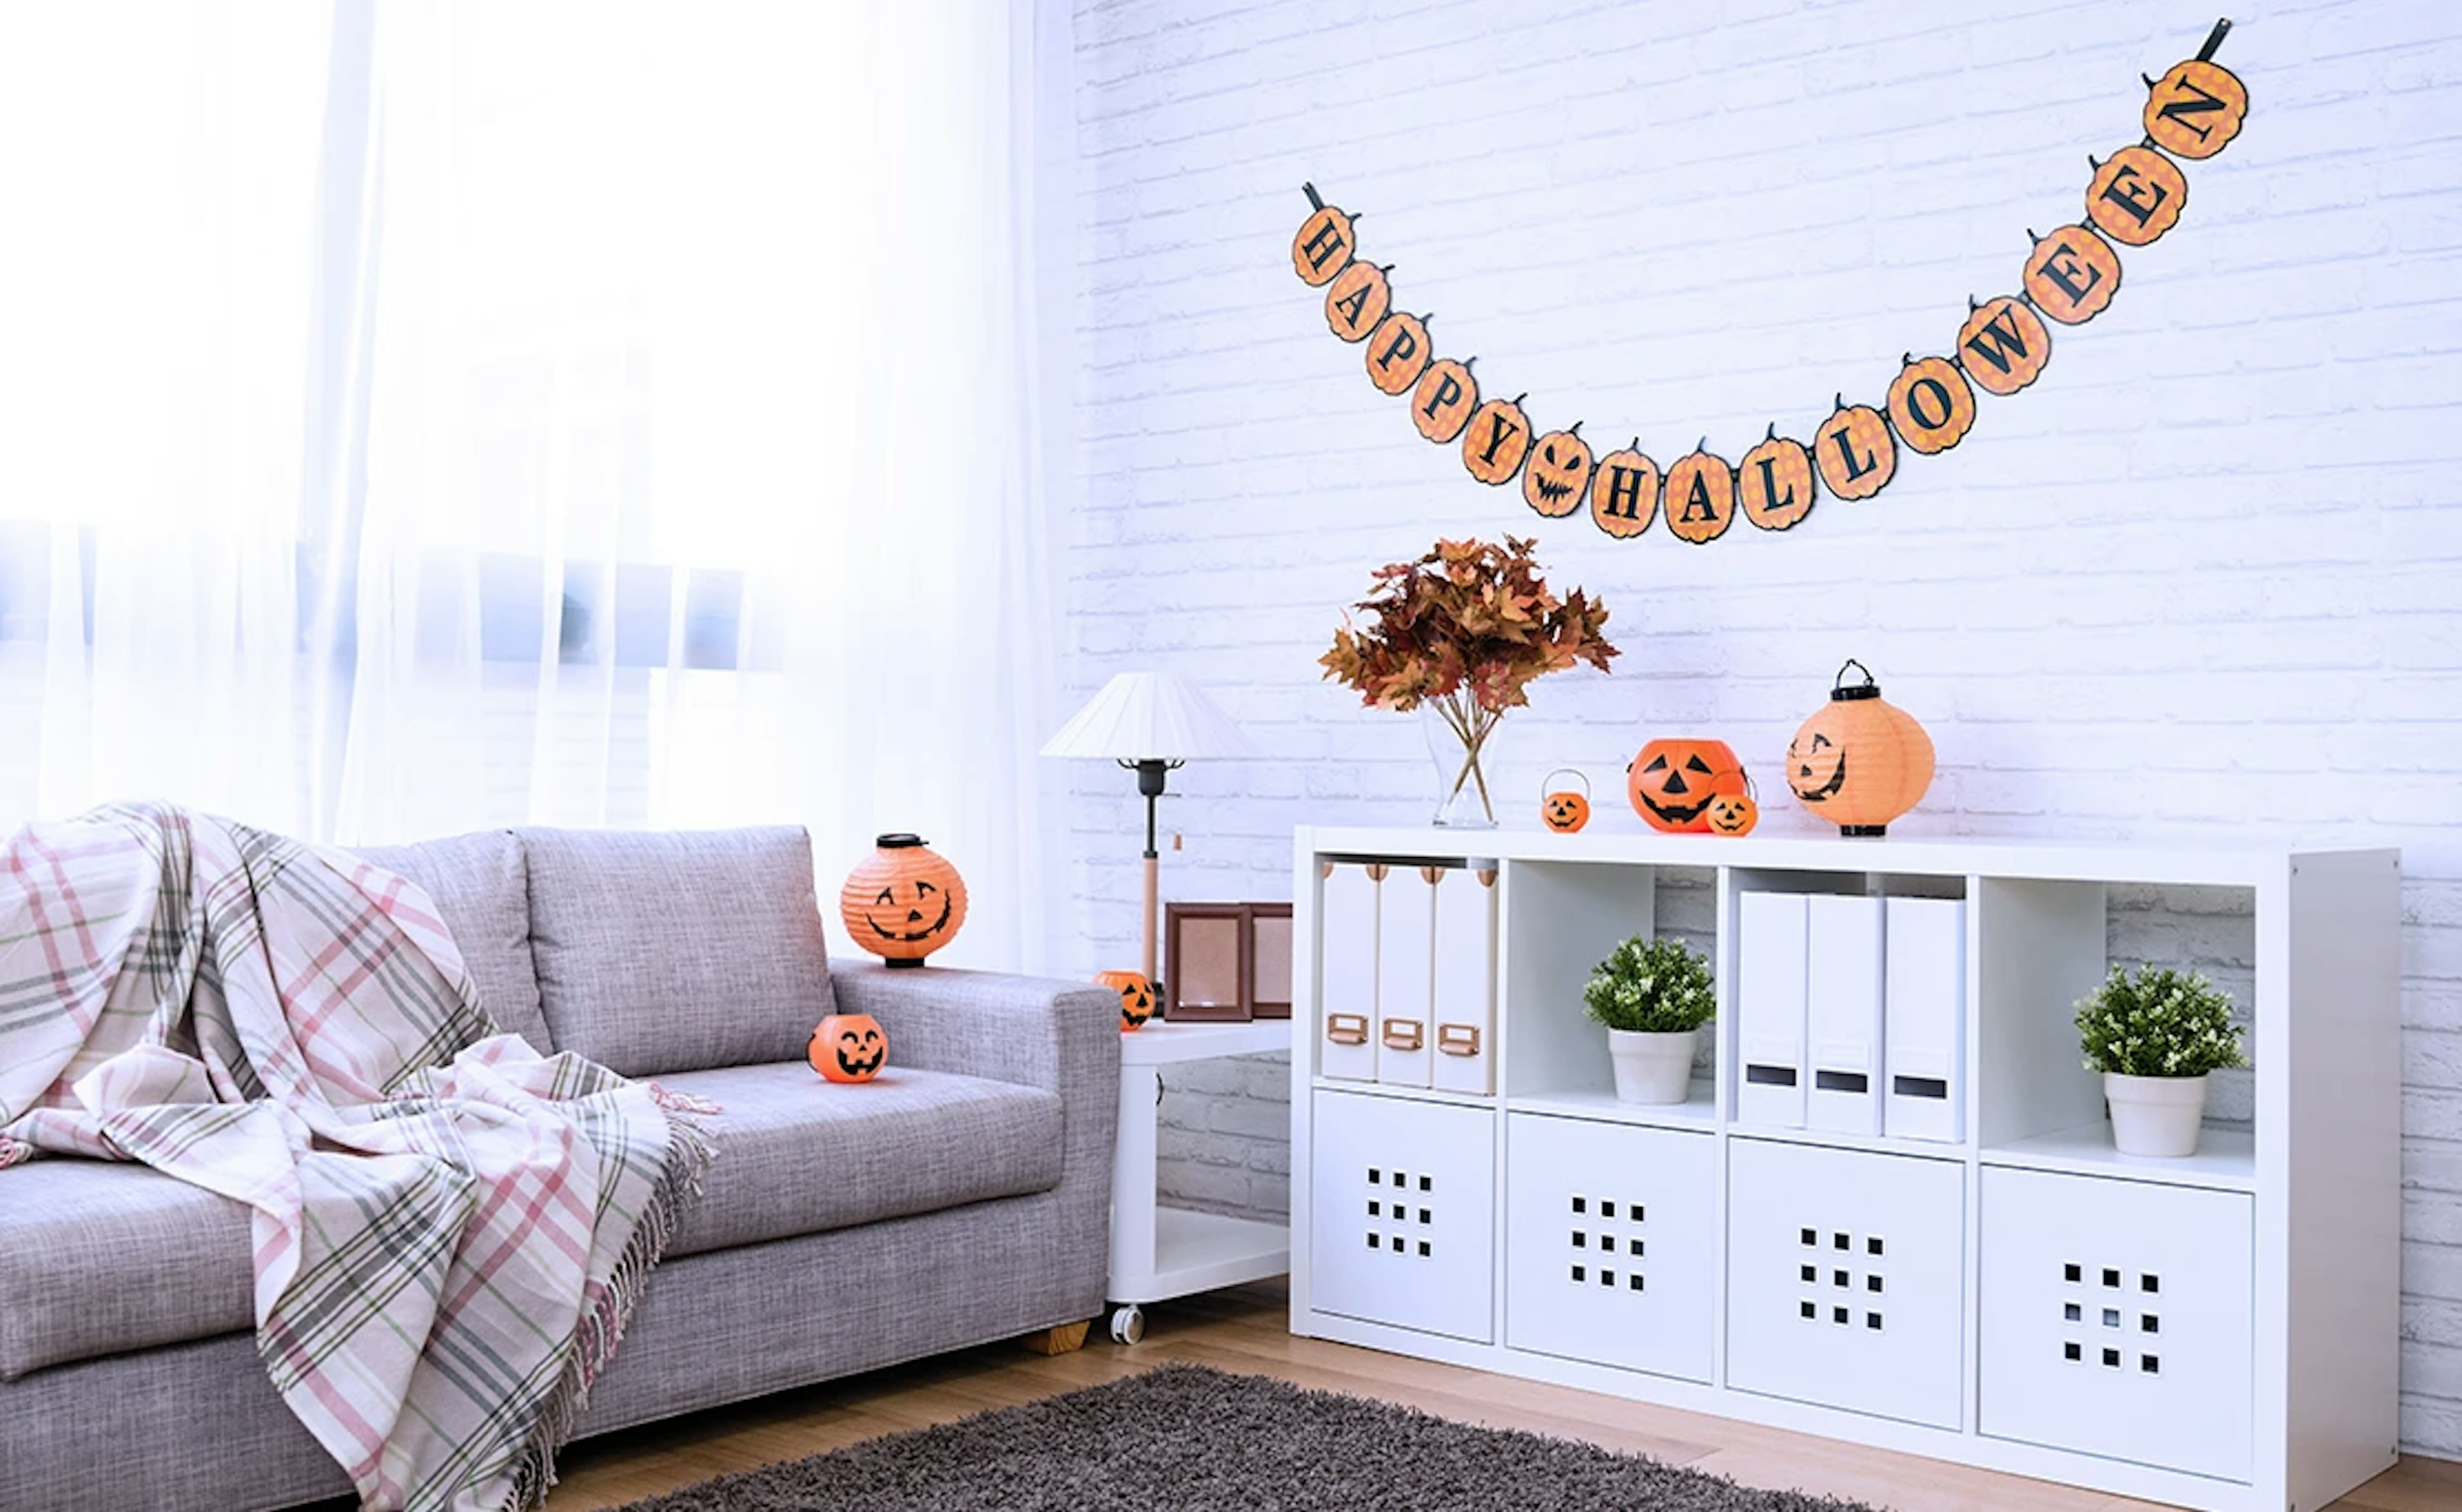 celebrate halloween with cash back from Ibotta